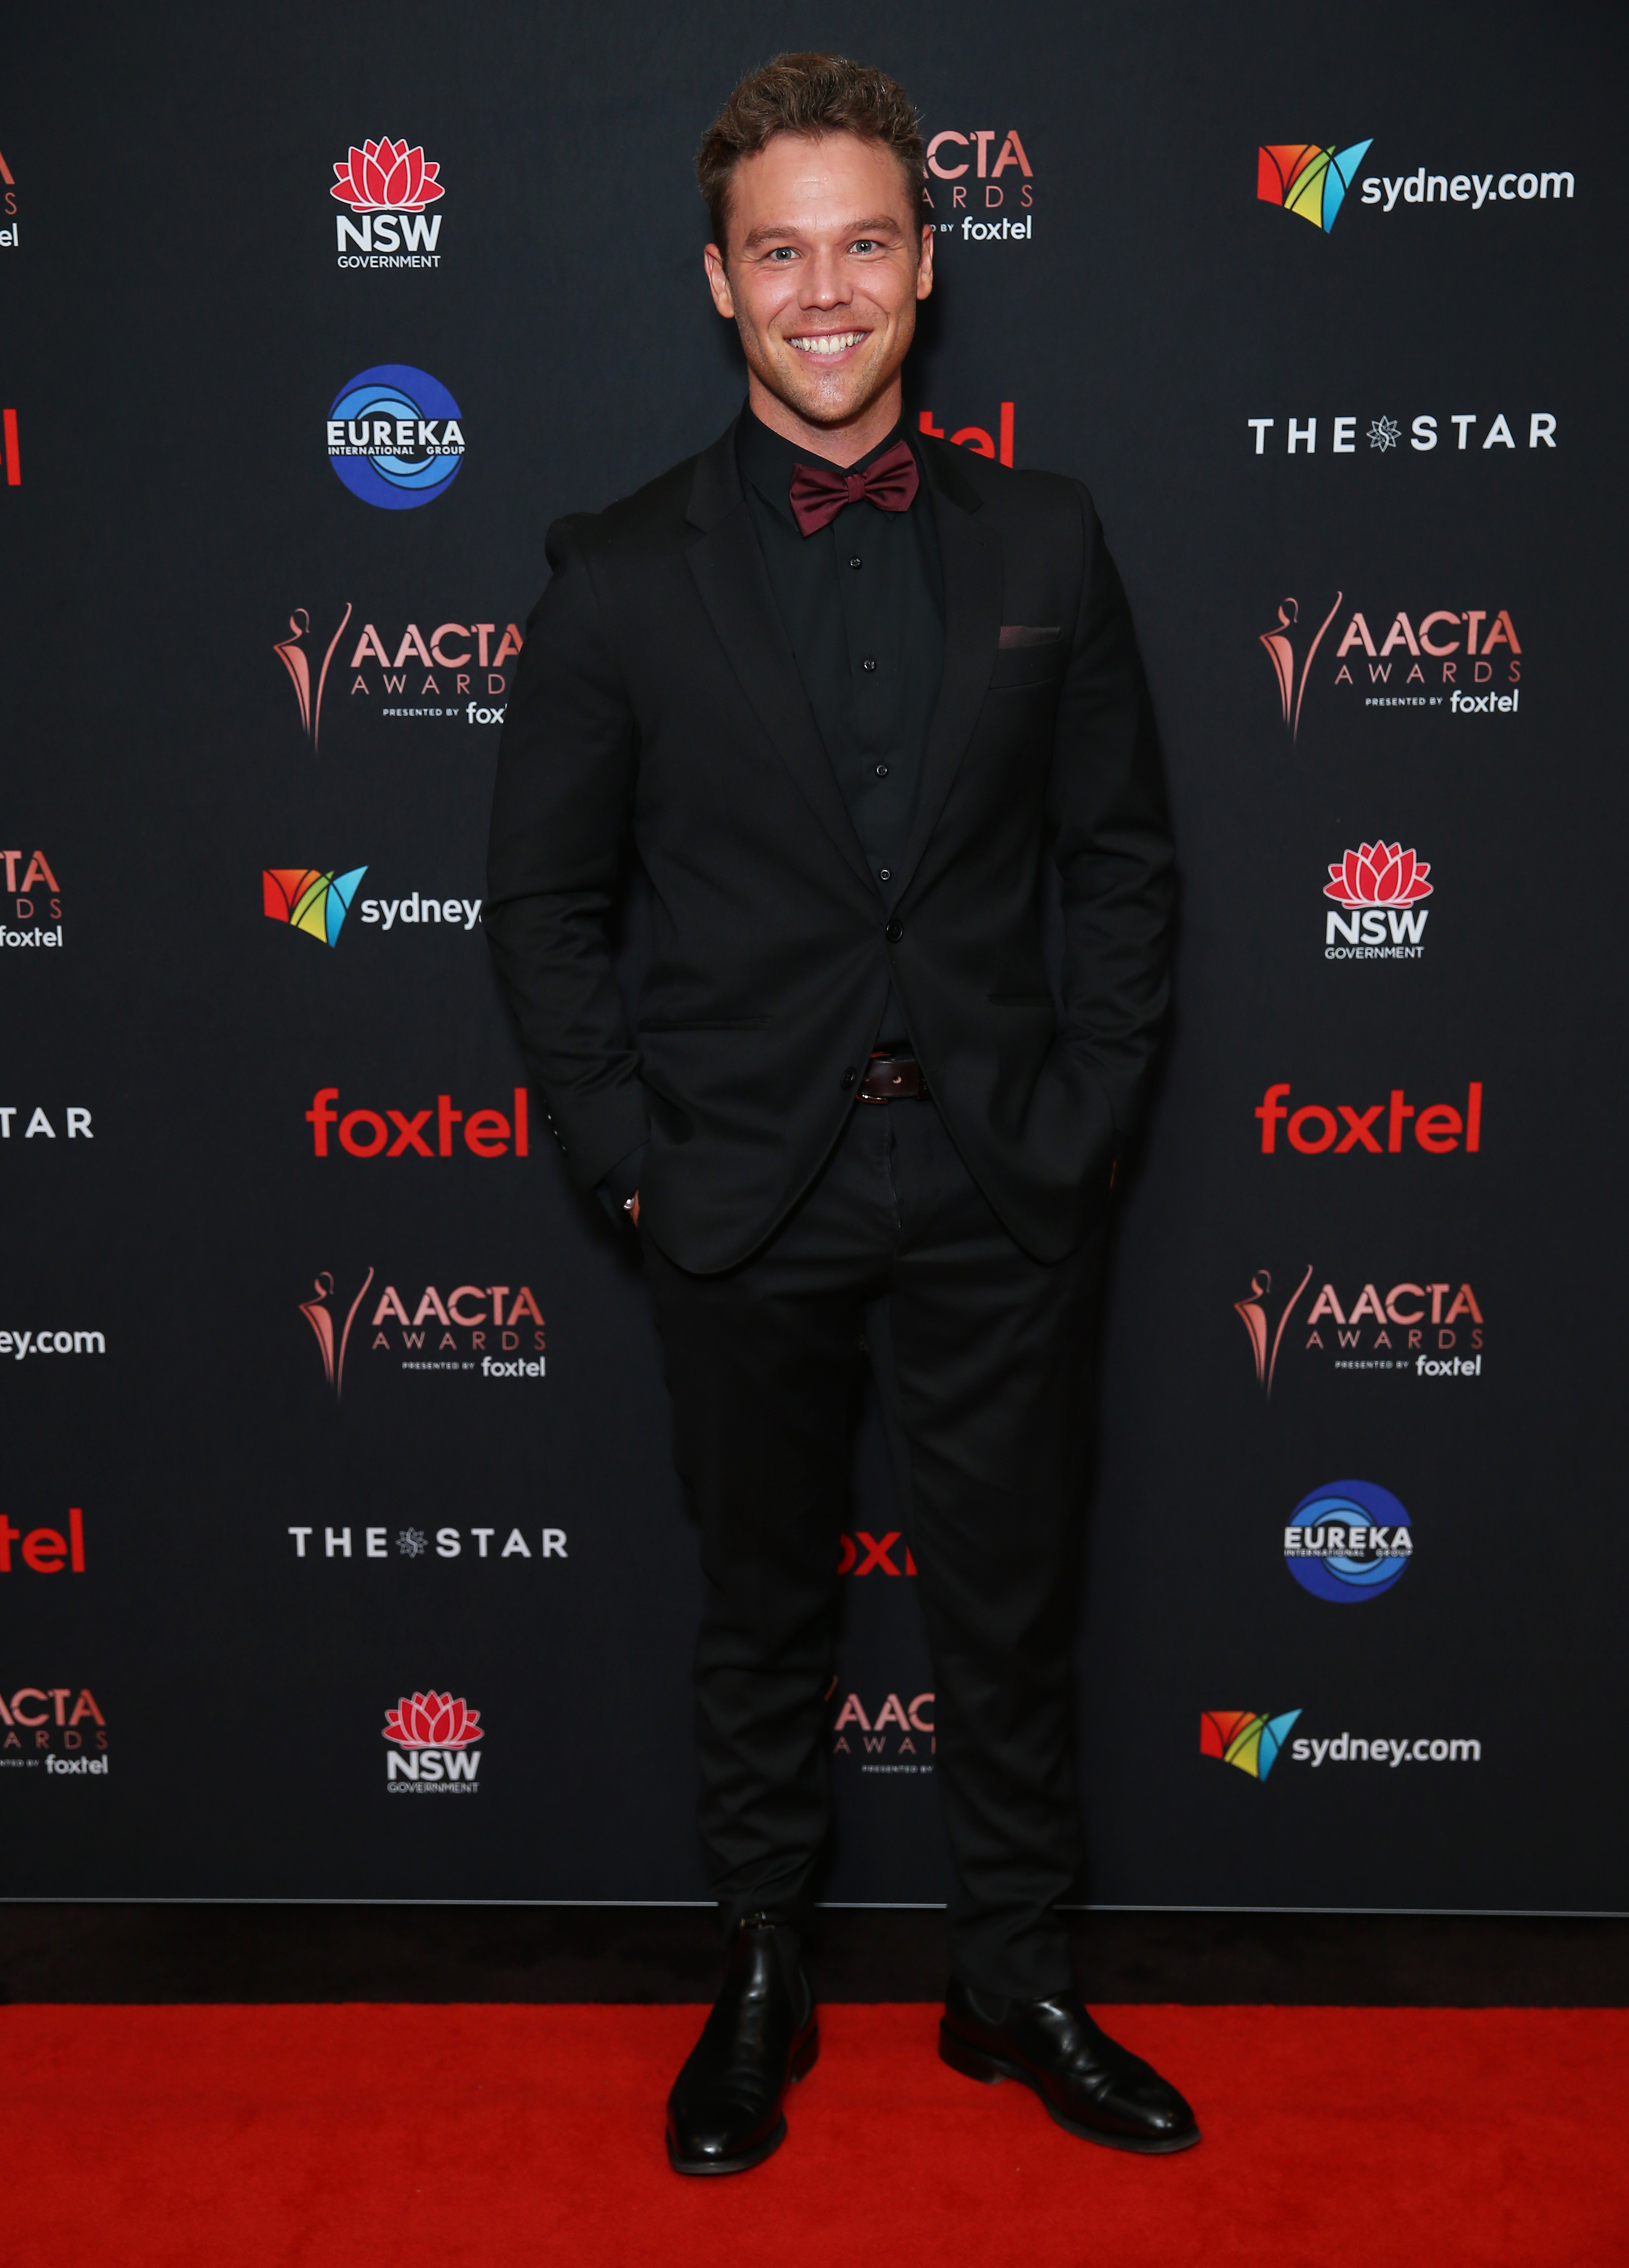 Lincoln Lewis attends the 2019 AACTA Awards Presented by Foxtel | Industry Luncheon at The Star on December 02, 2019 in Sydney, Australia.